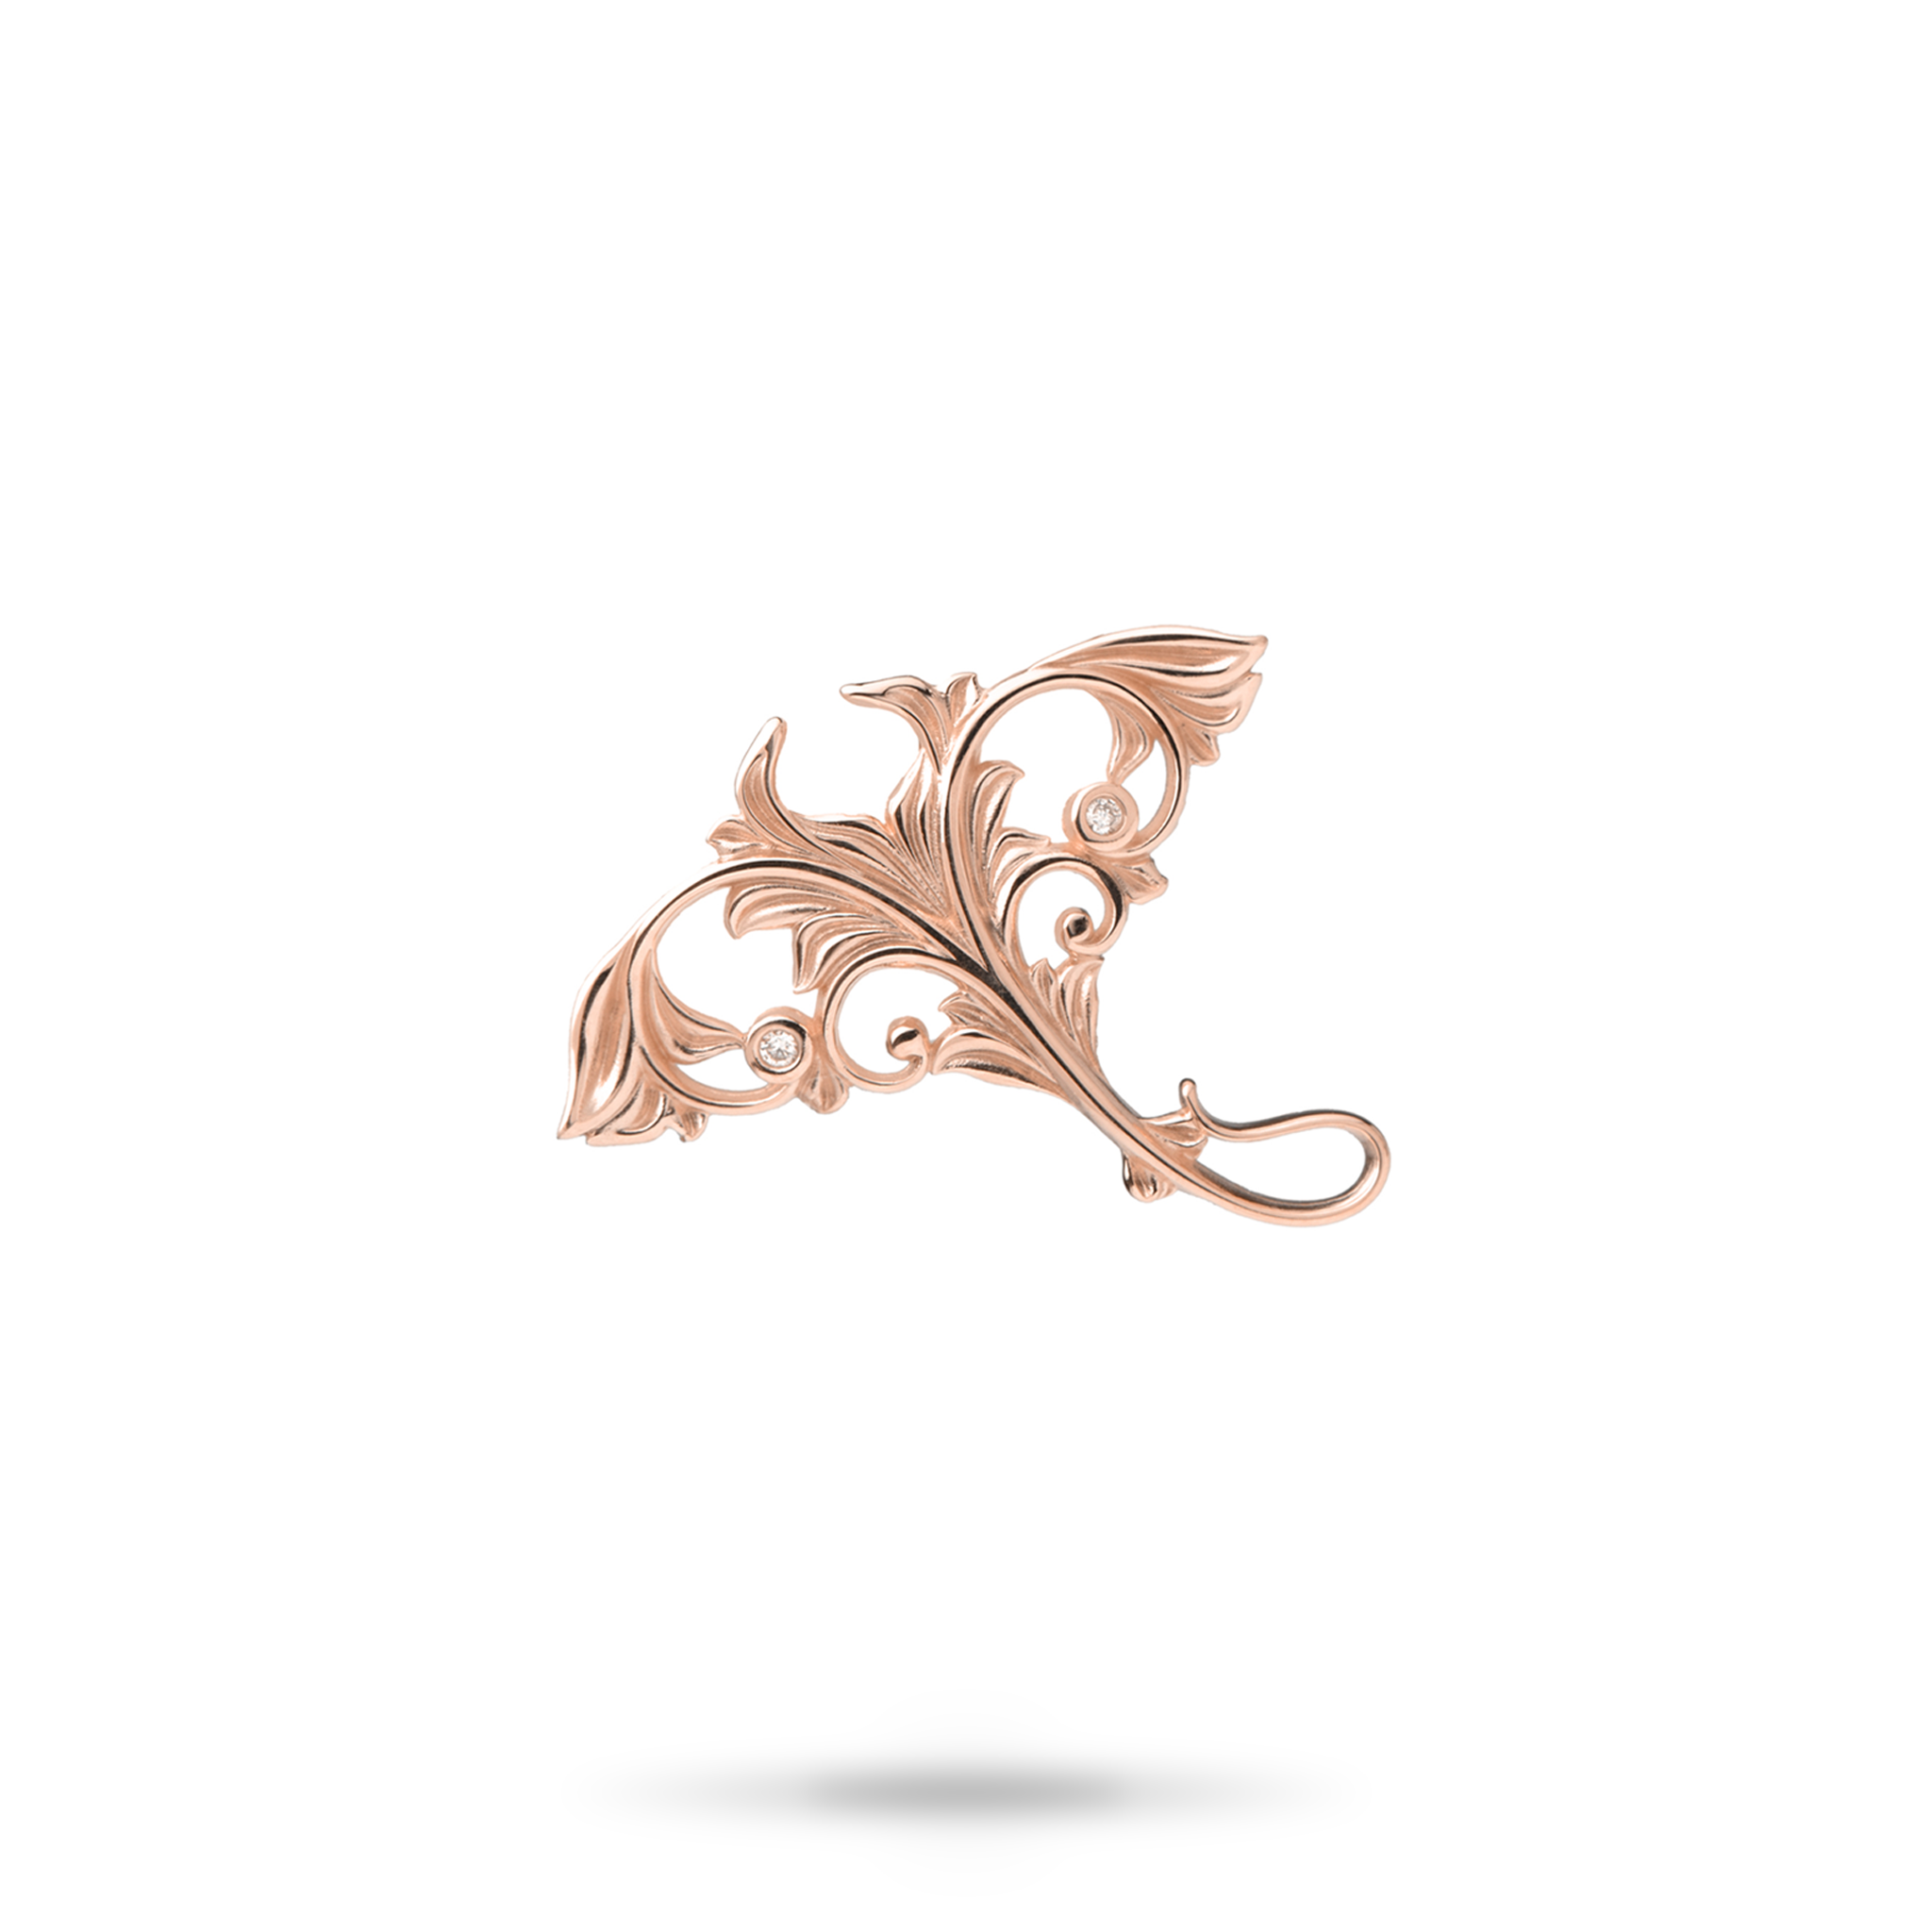 Living Heirloom Manta Ray Pendant in Rose Gold with Diamonds - 23mm